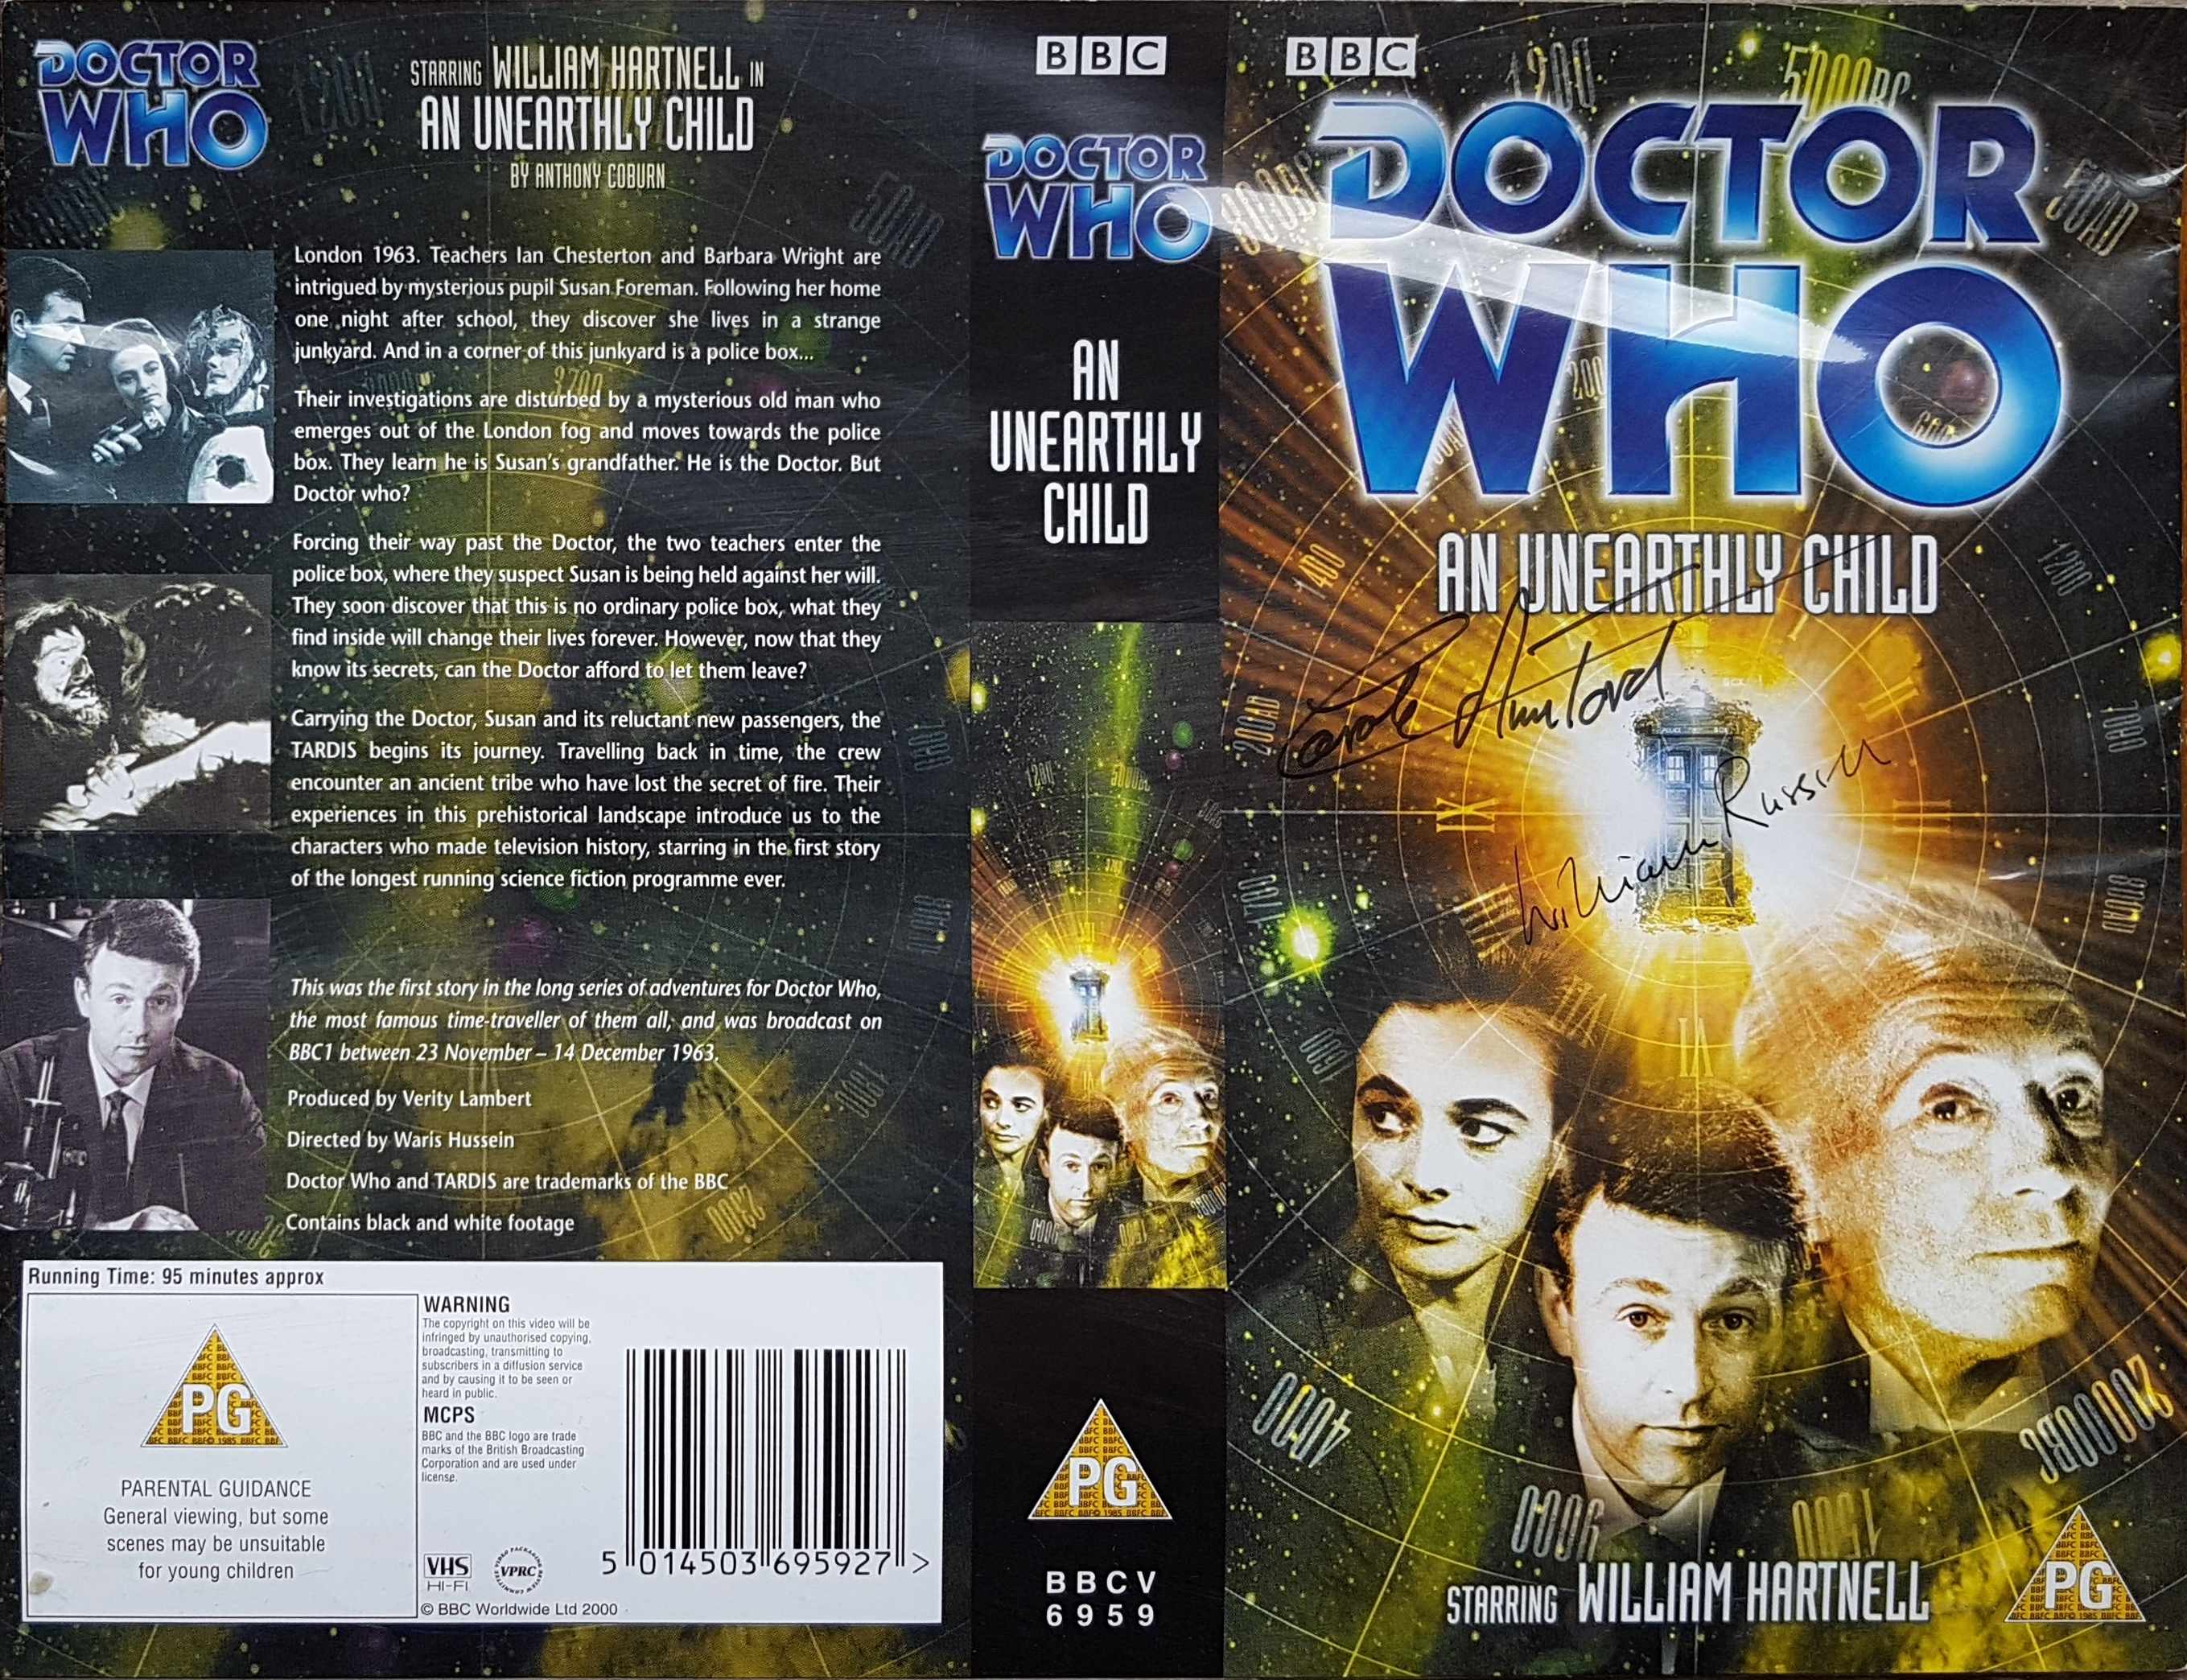 Picture of BBCV 6959 Doctor Who - An unearthly child by artist Anthony Coburn from the BBC records and Tapes library